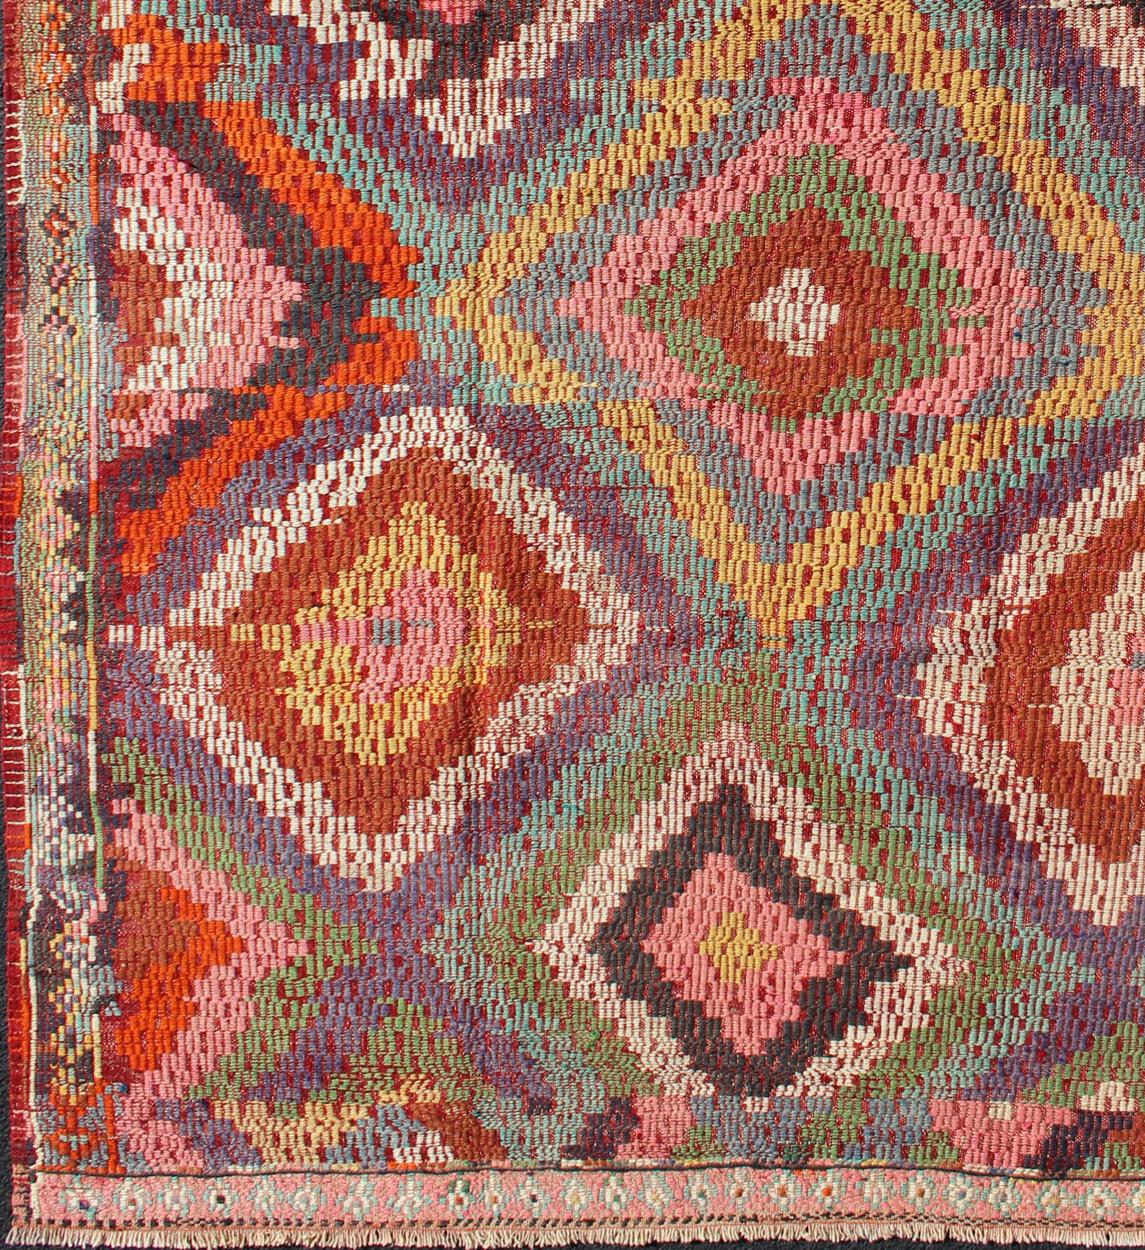 Vintage Turkish Kilim Jajim Rug with Broken Diamond Pattern and Vibrant Colors,  rug / Tu-Ned-128,
This wonderful Turkish Jajeem from the 1950s features a multi-diamond pattern rendered in a chic color palette. The broken diamond pattern, along with